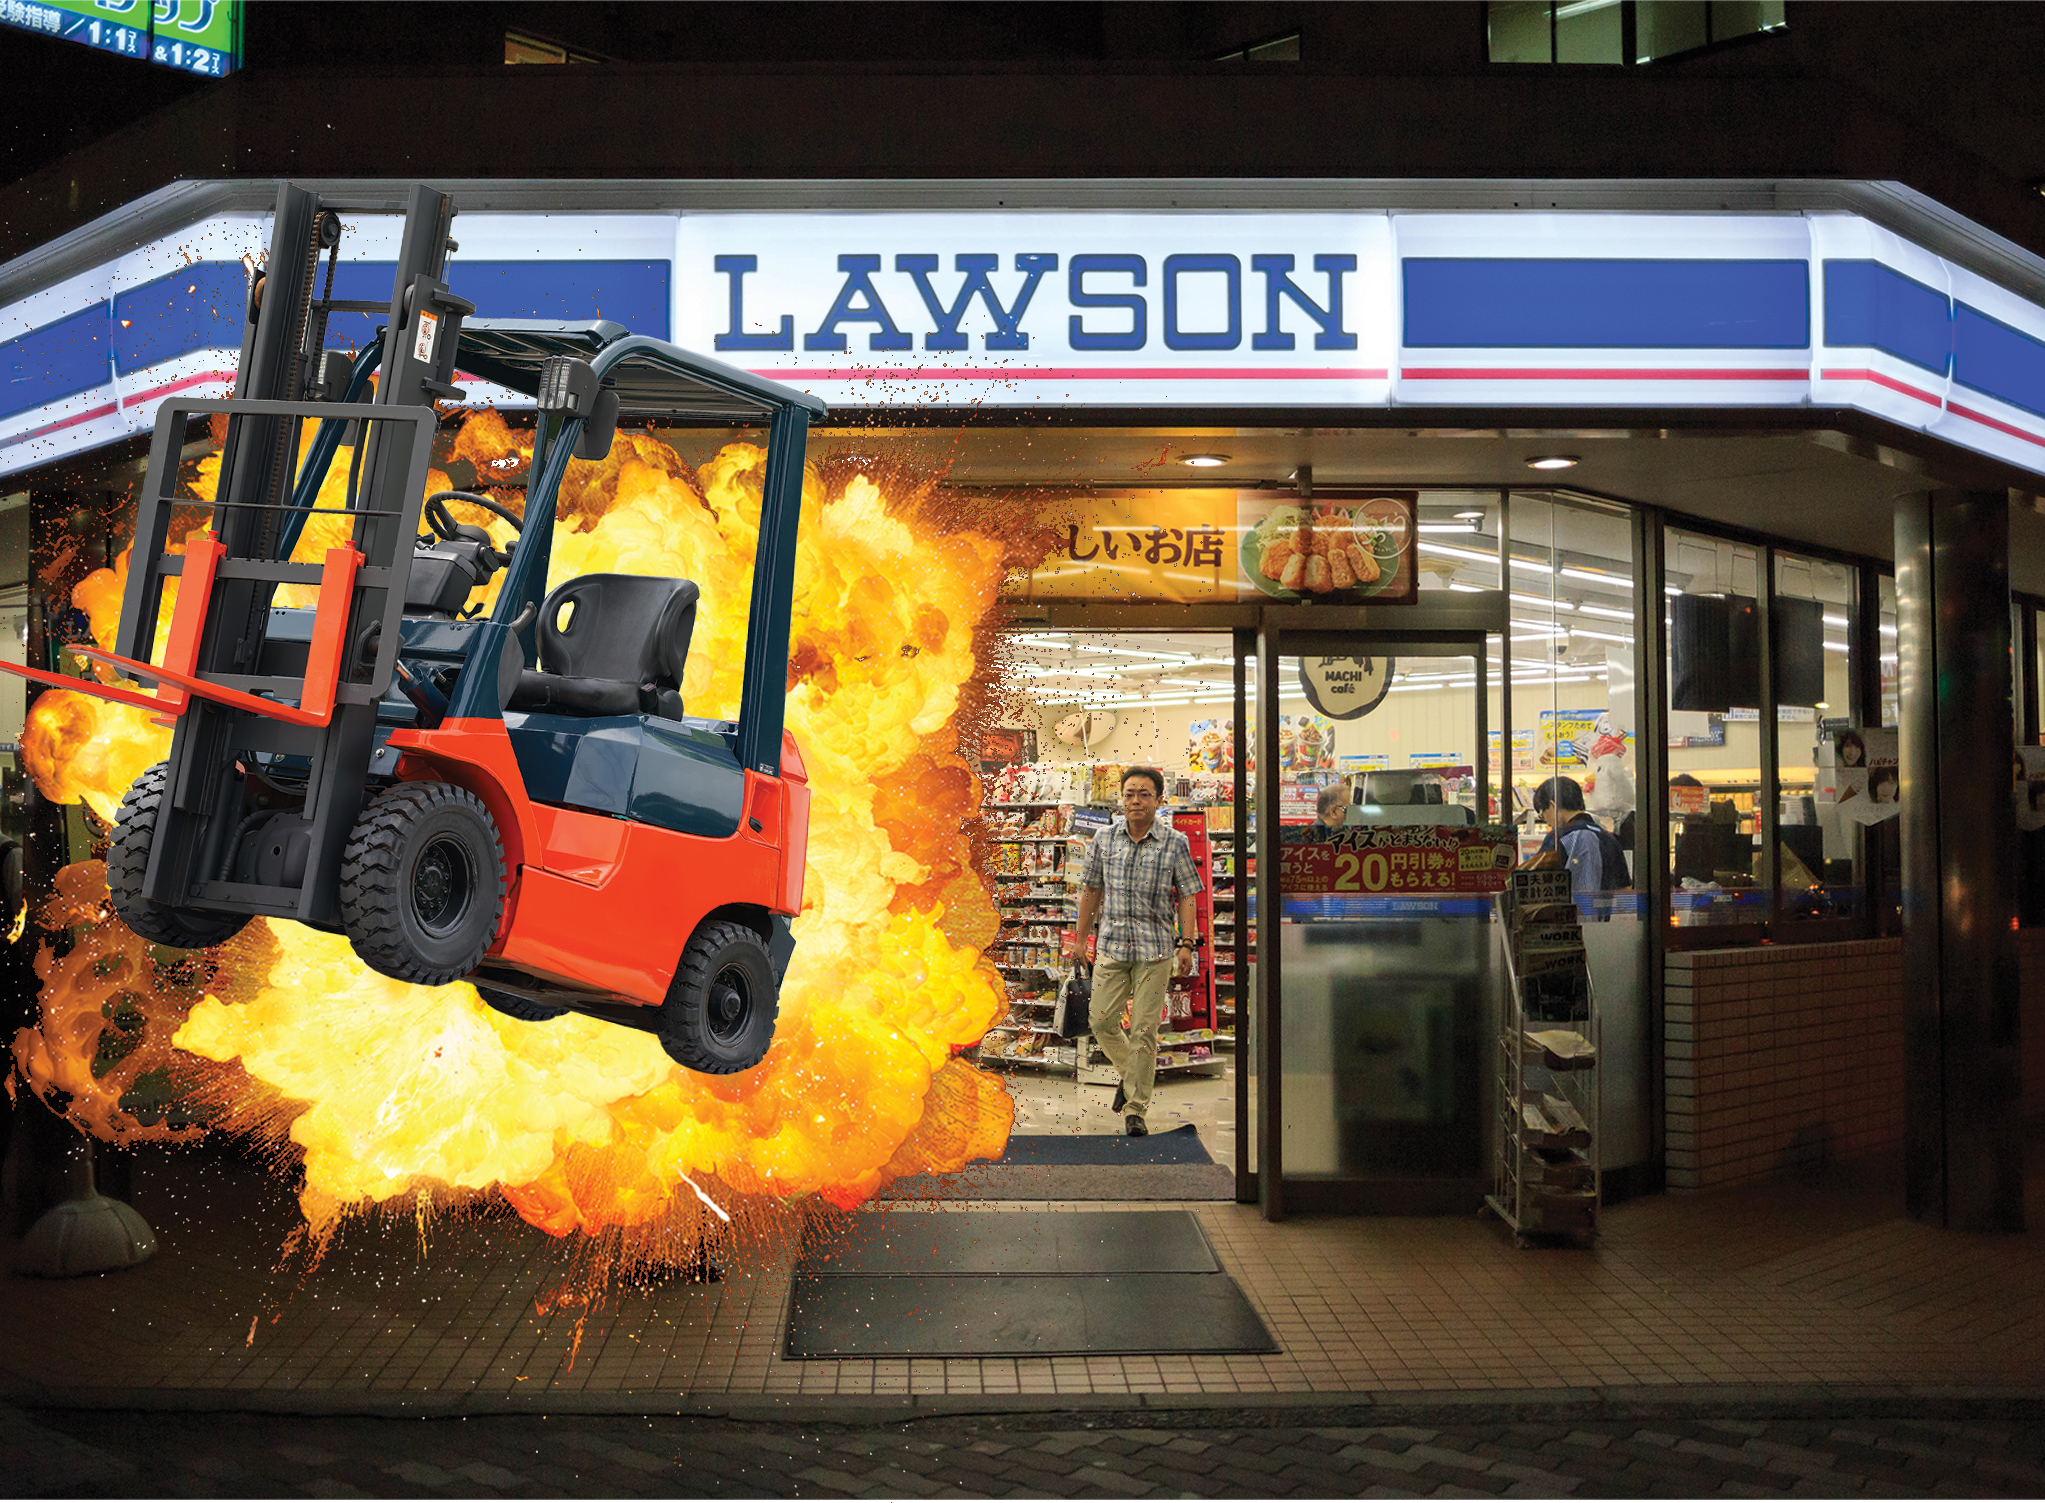 Forklift Rams Into Lawson in Attempt to Steal ATM